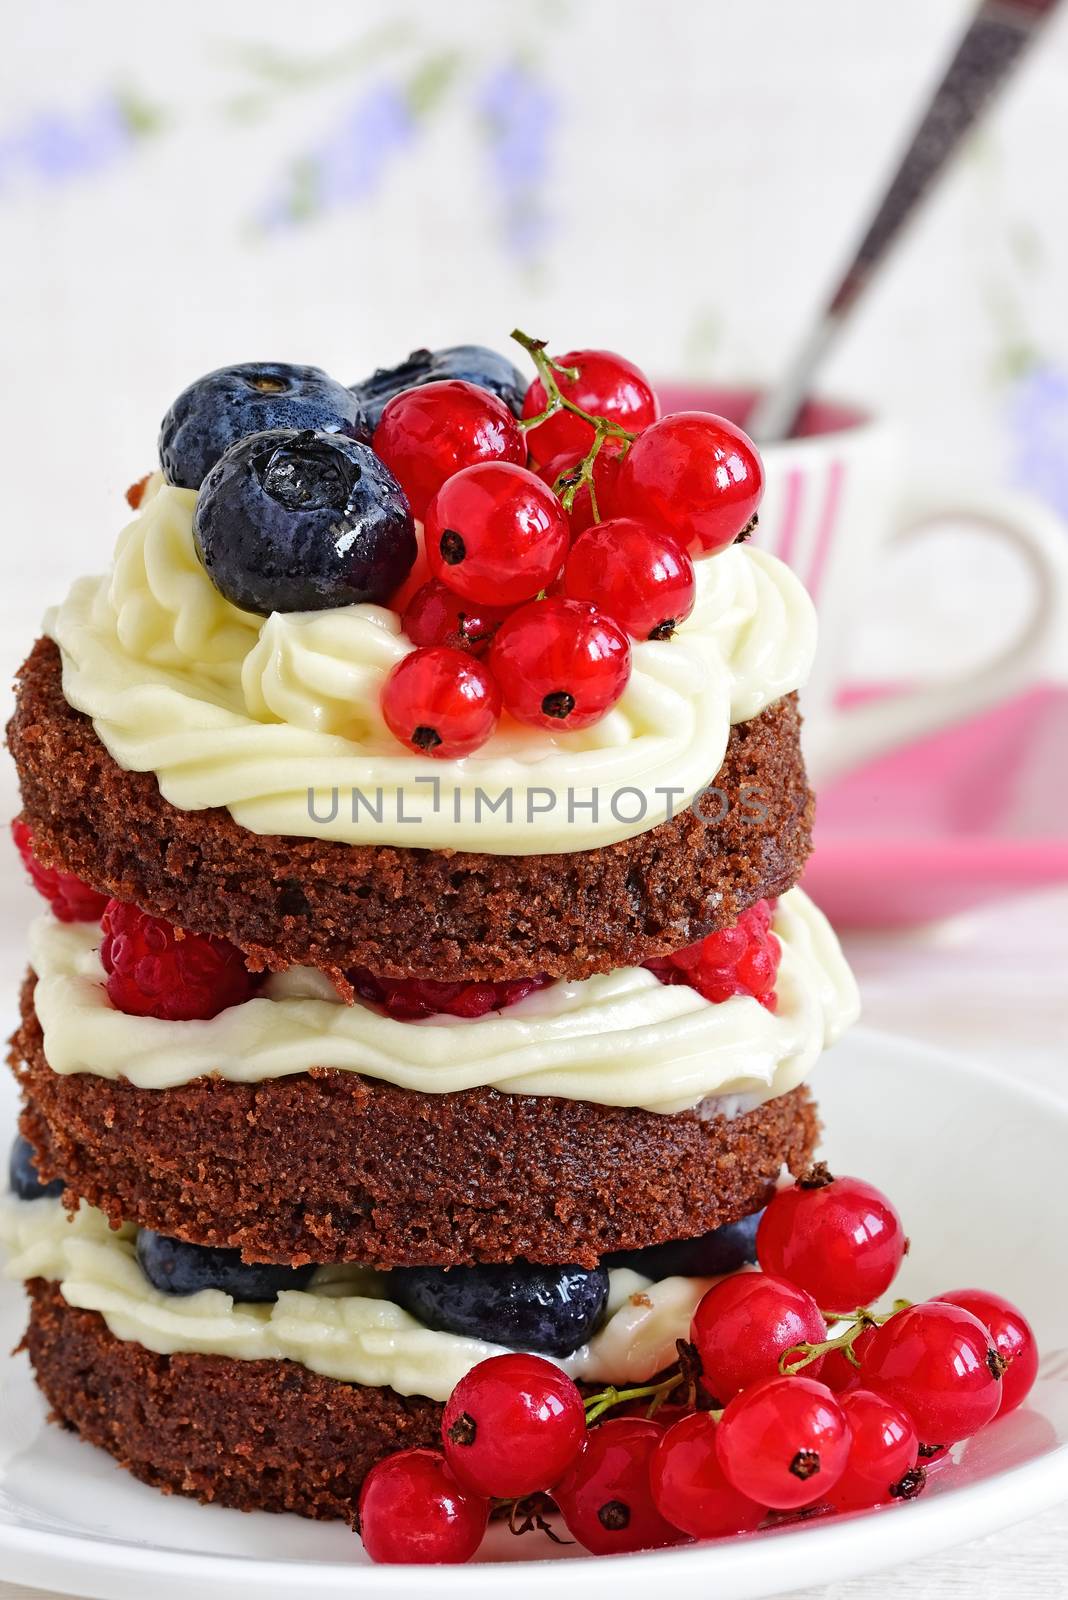 Homemade cake with berries by Visual-Content